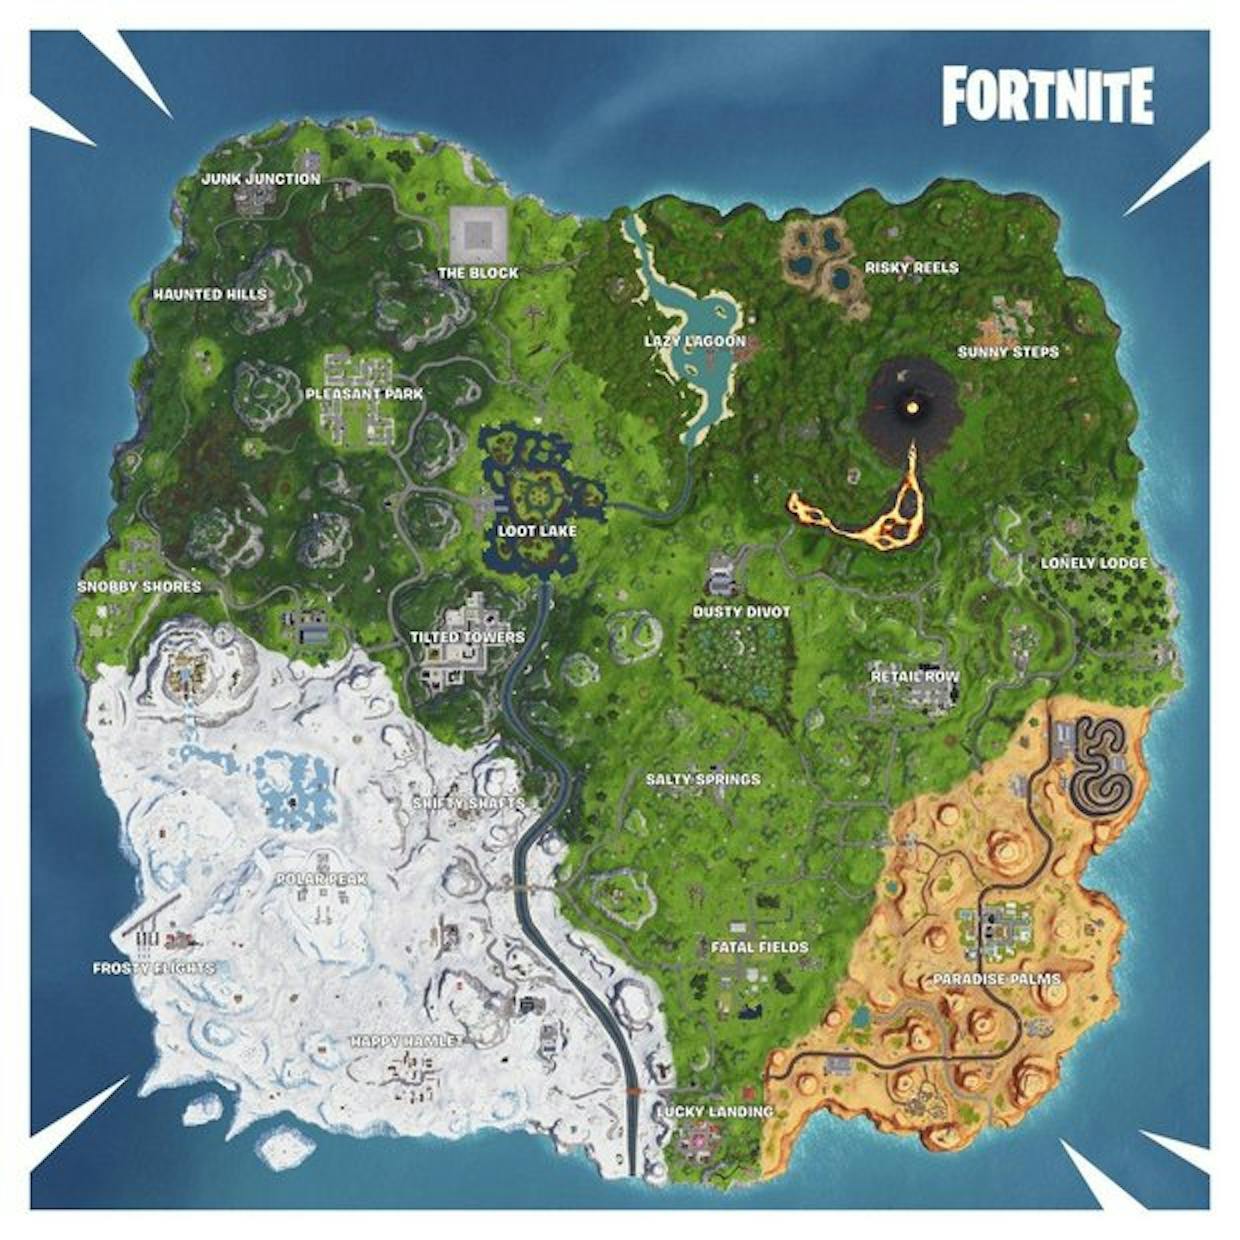 Fortnite Season 9 Absolutely Everything We Know About Season 9 - image result for fortnite season 8 map